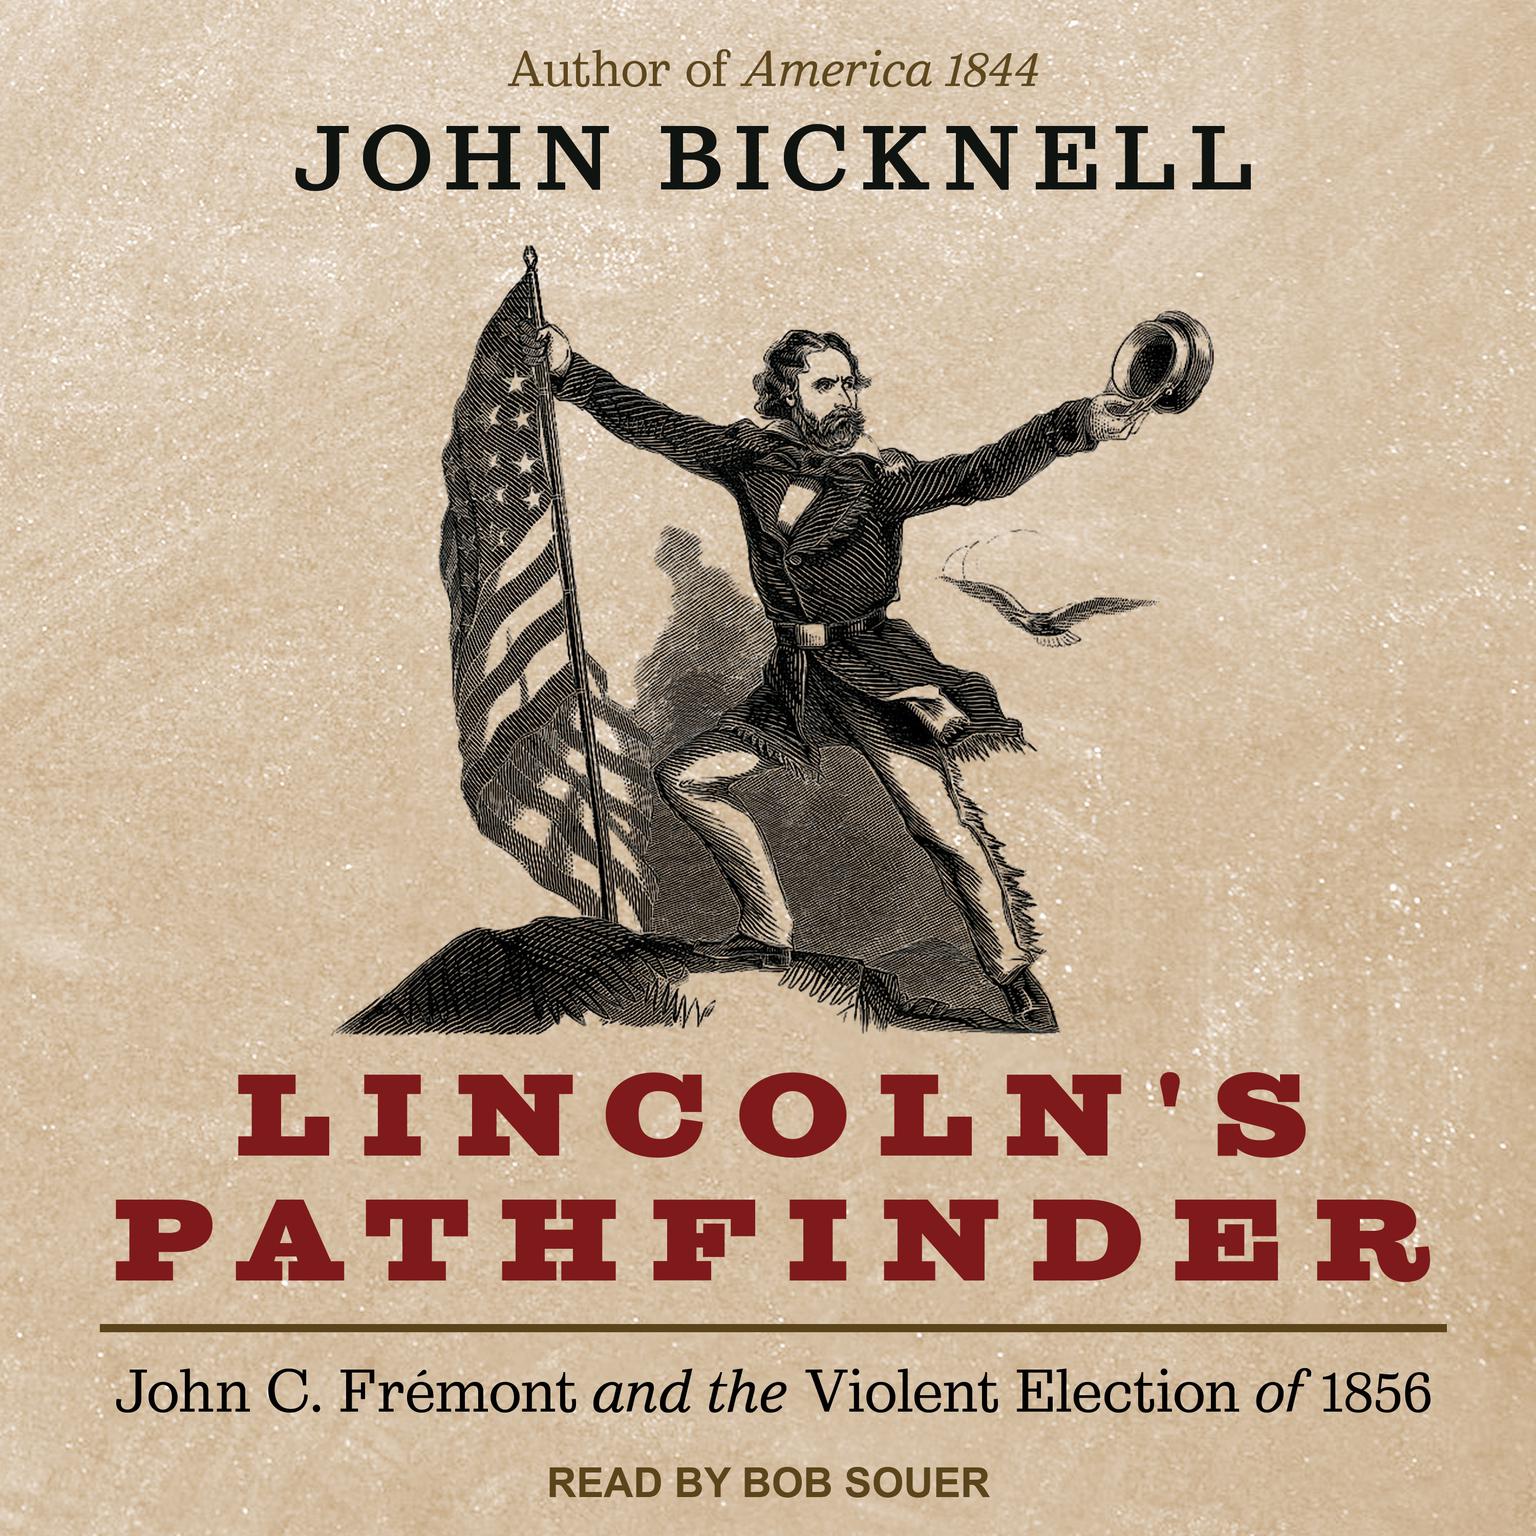 Lincolns Pathfinder: John C. Fremont and the Violent Election of 1856 Audiobook, by John Bicknell